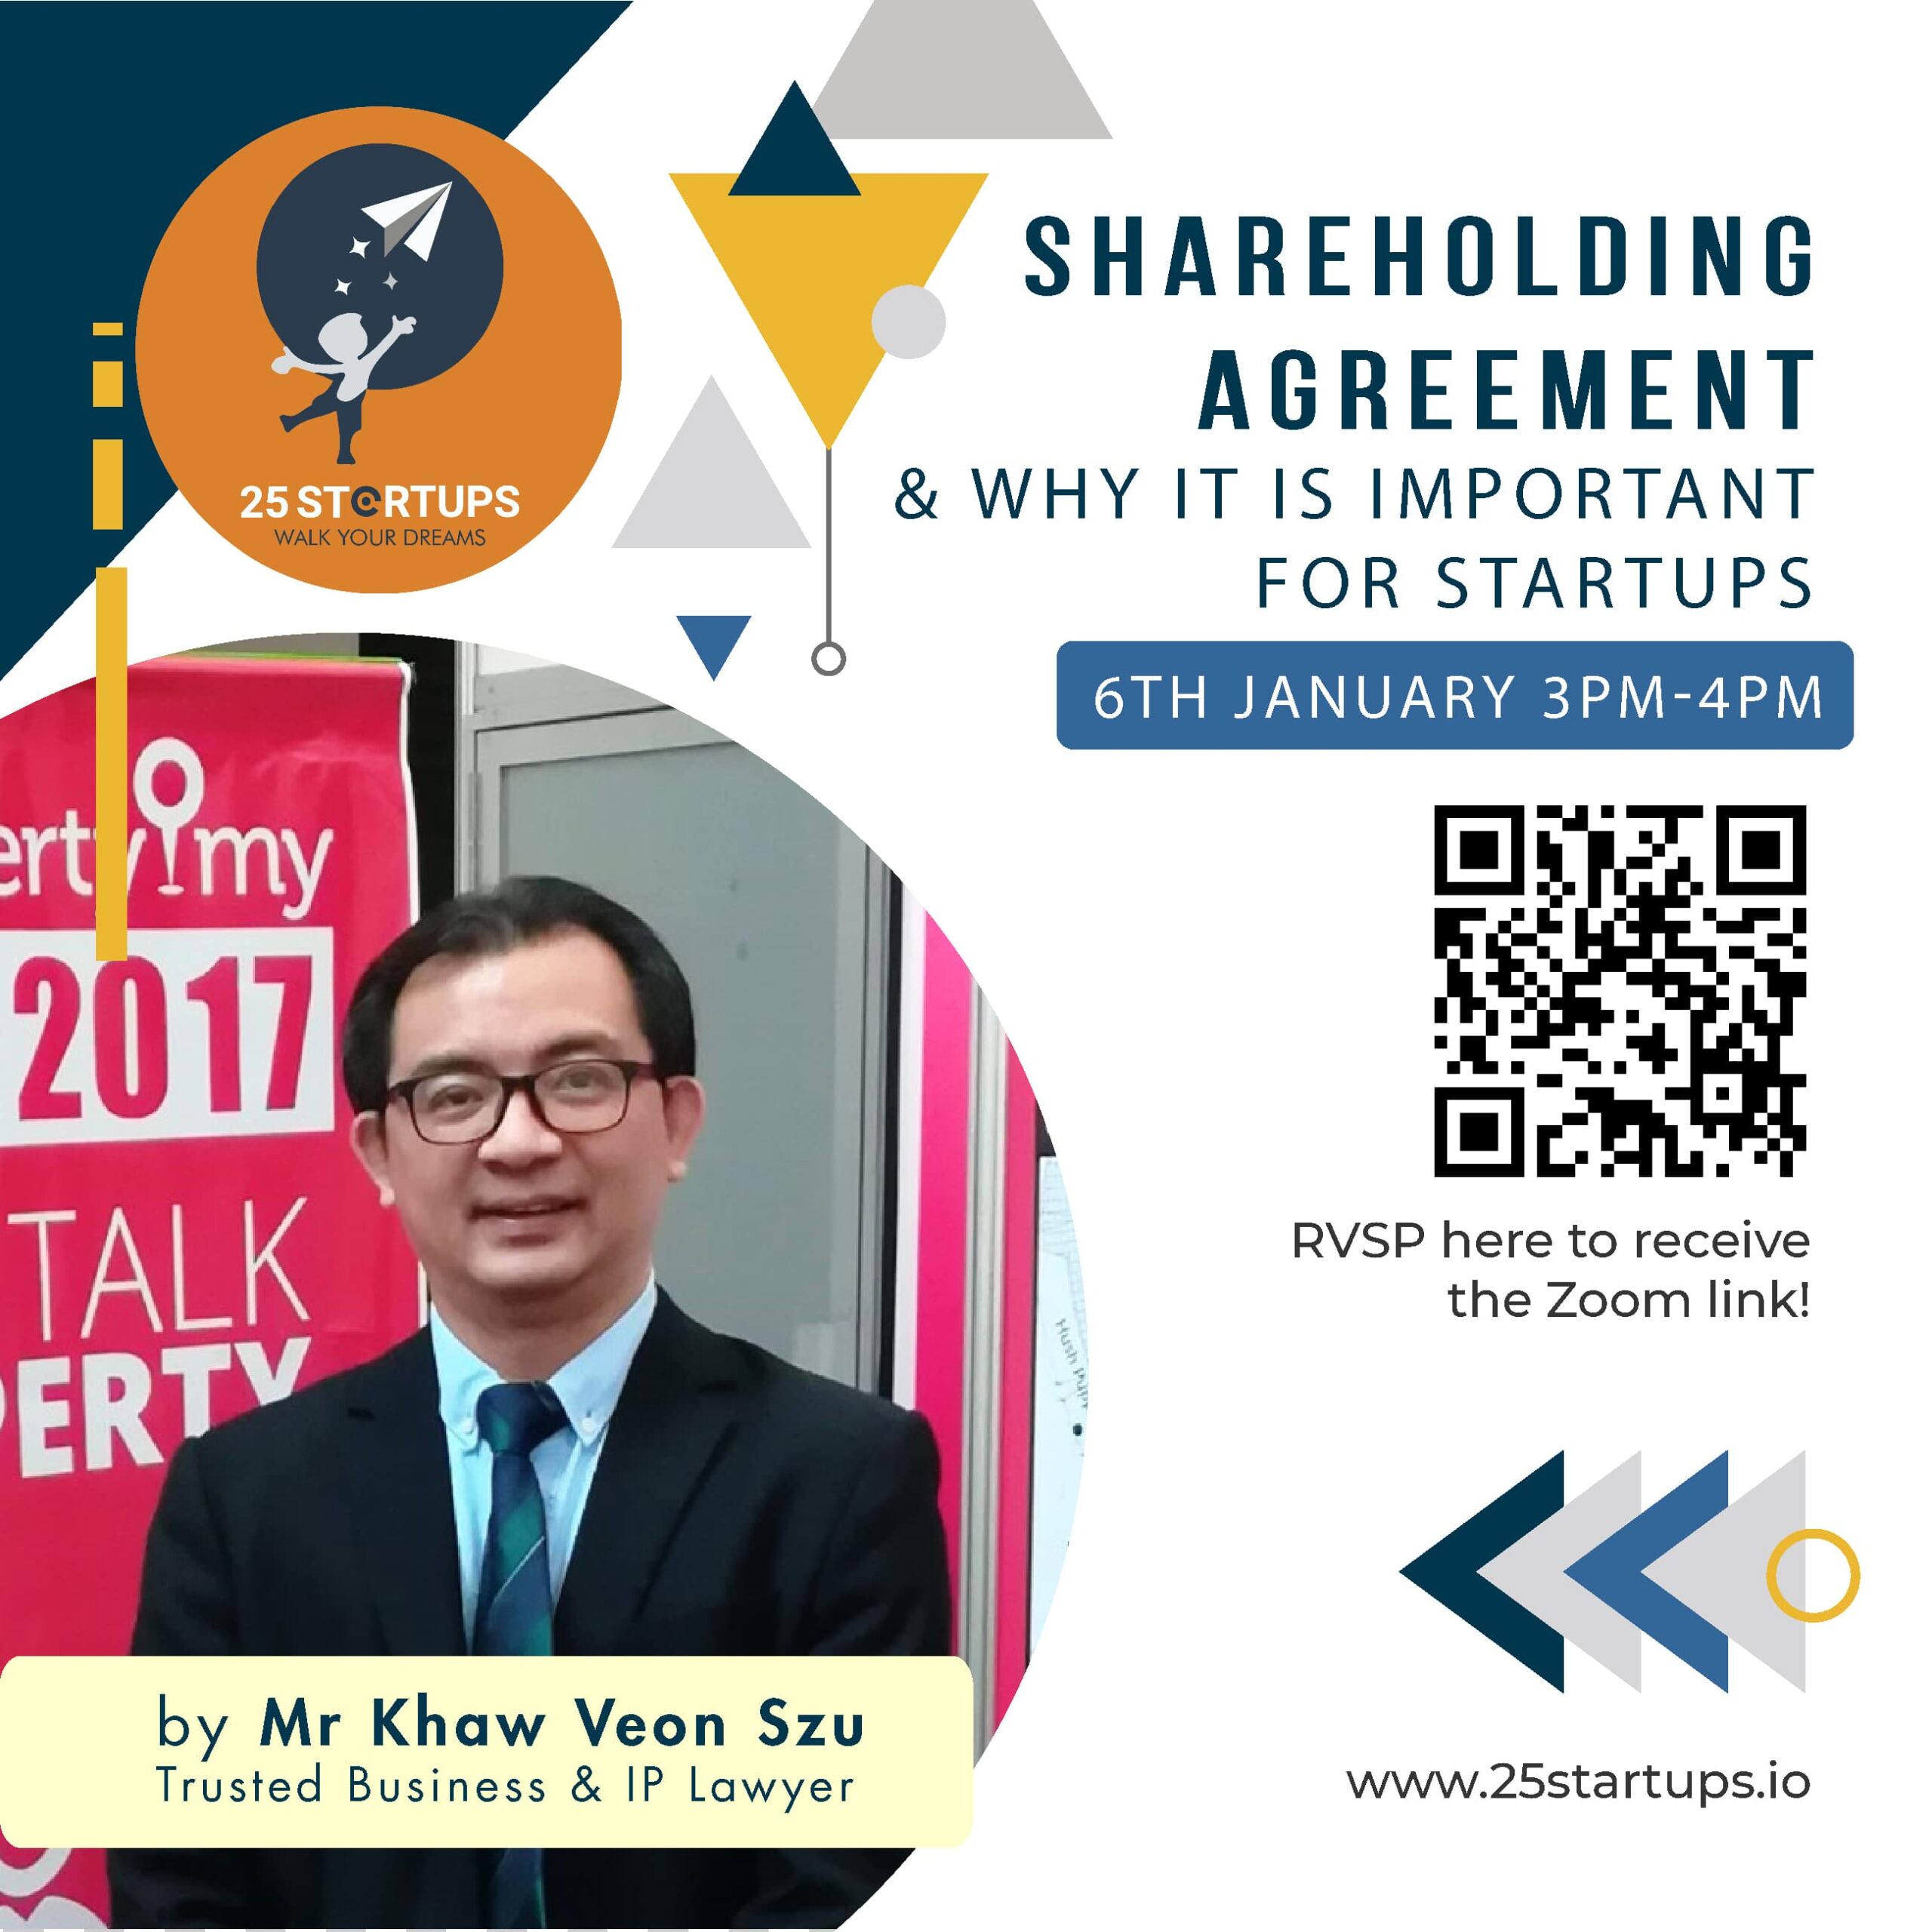 Shareholding Agreement and Why It is Important for Startups?